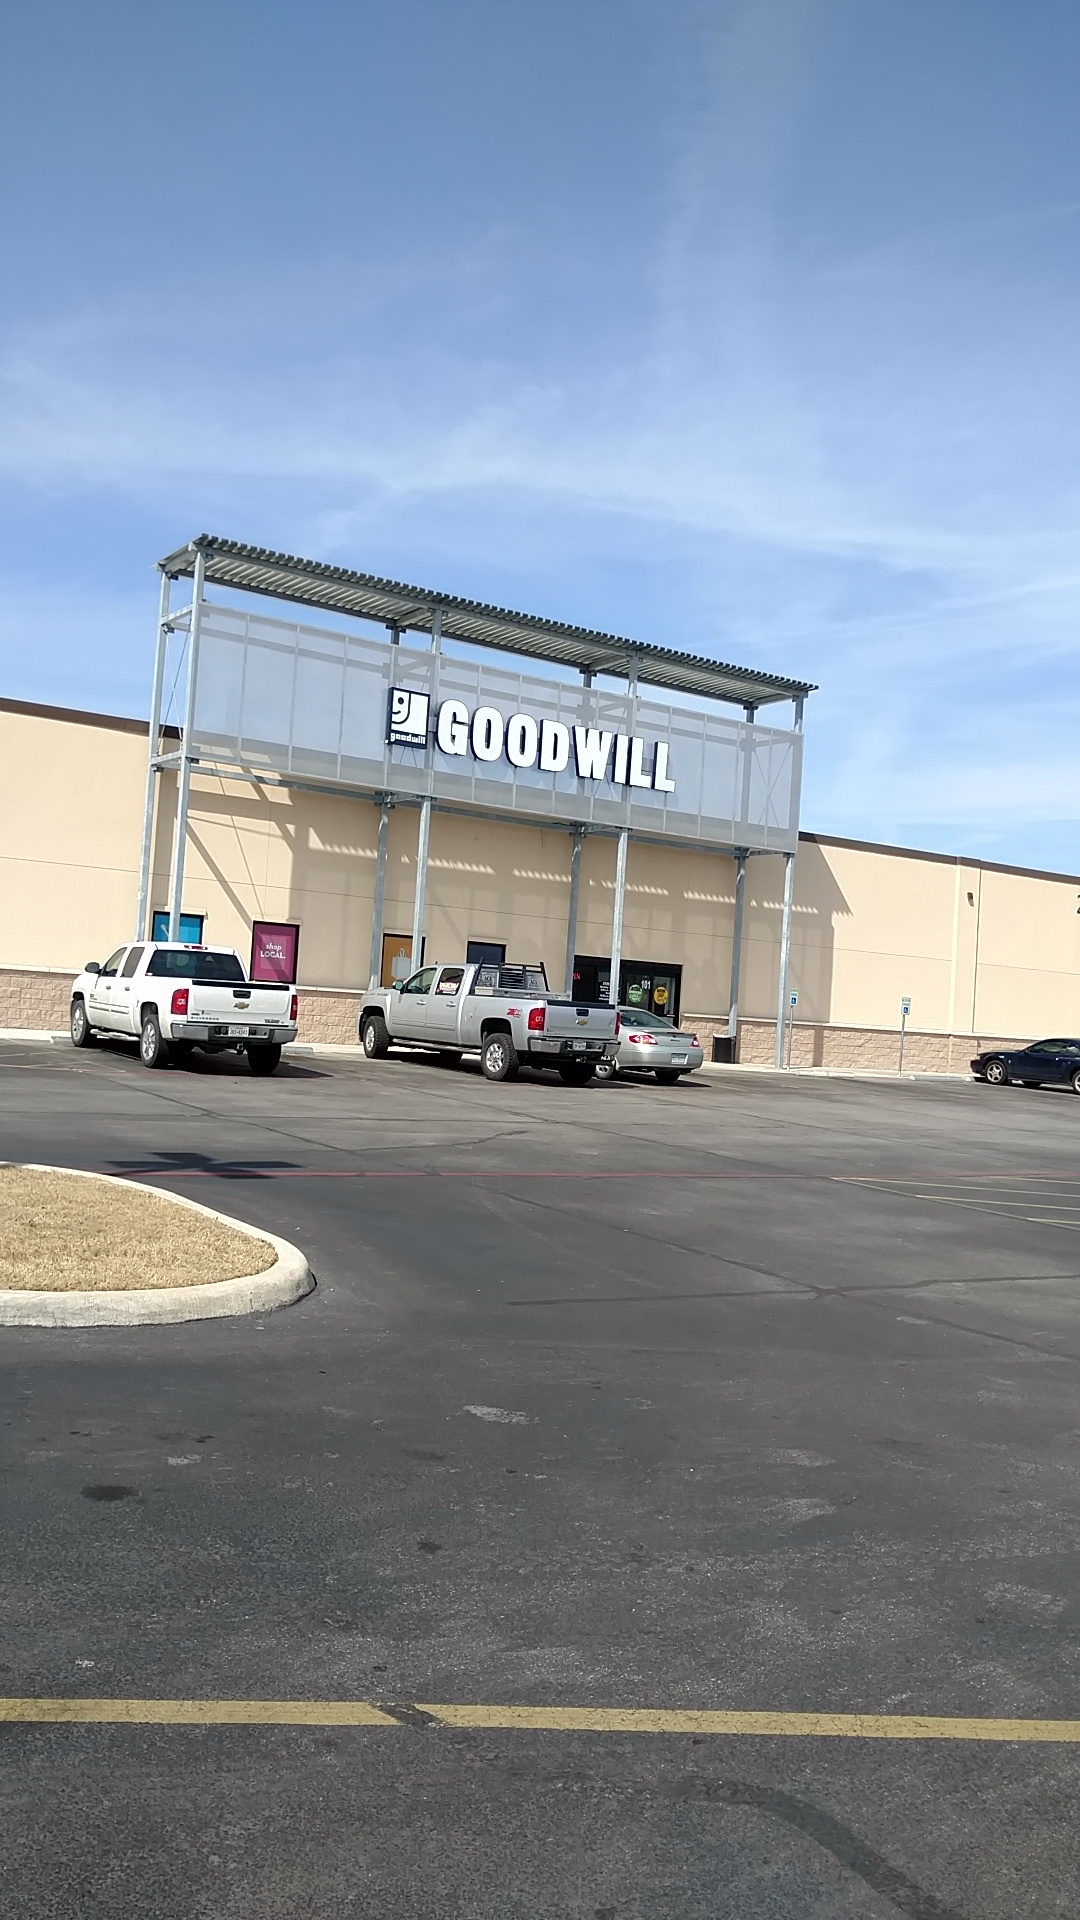 Goodwill Central Texas - Marble Falls